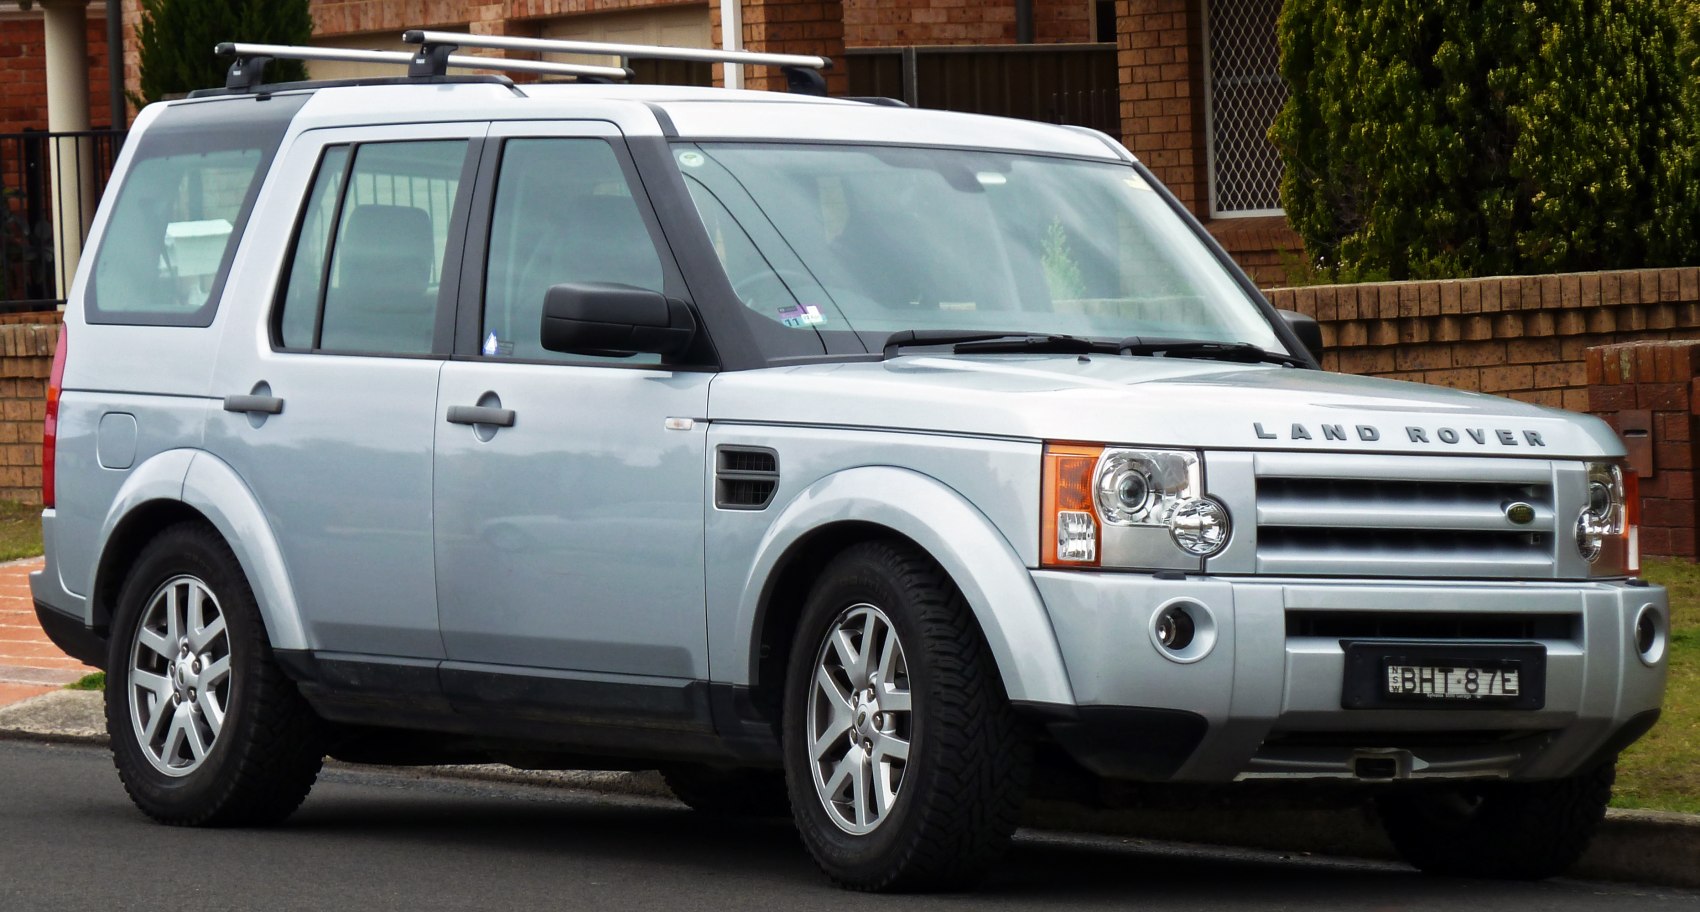 https://totalrenting.es/wp-content/uploads/2022/10/land-rover-discovery-iii-2004-2-7-tdi-190-cv-todoterreno-4.png